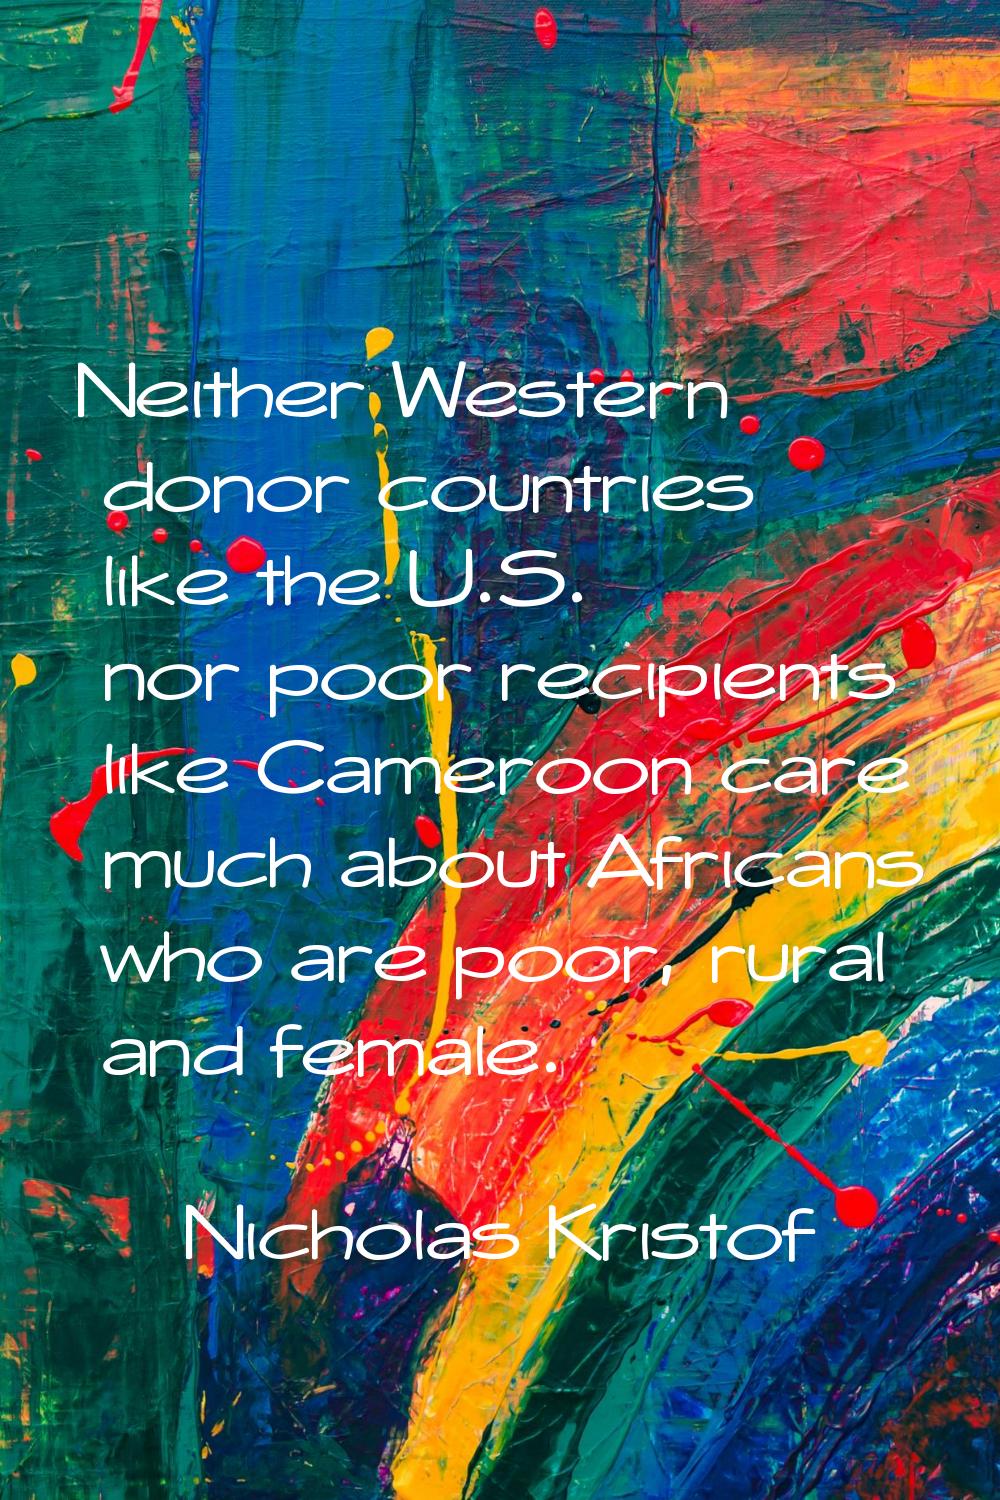 Neither Western donor countries like the U.S. nor poor recipients like Cameroon care much about Afr